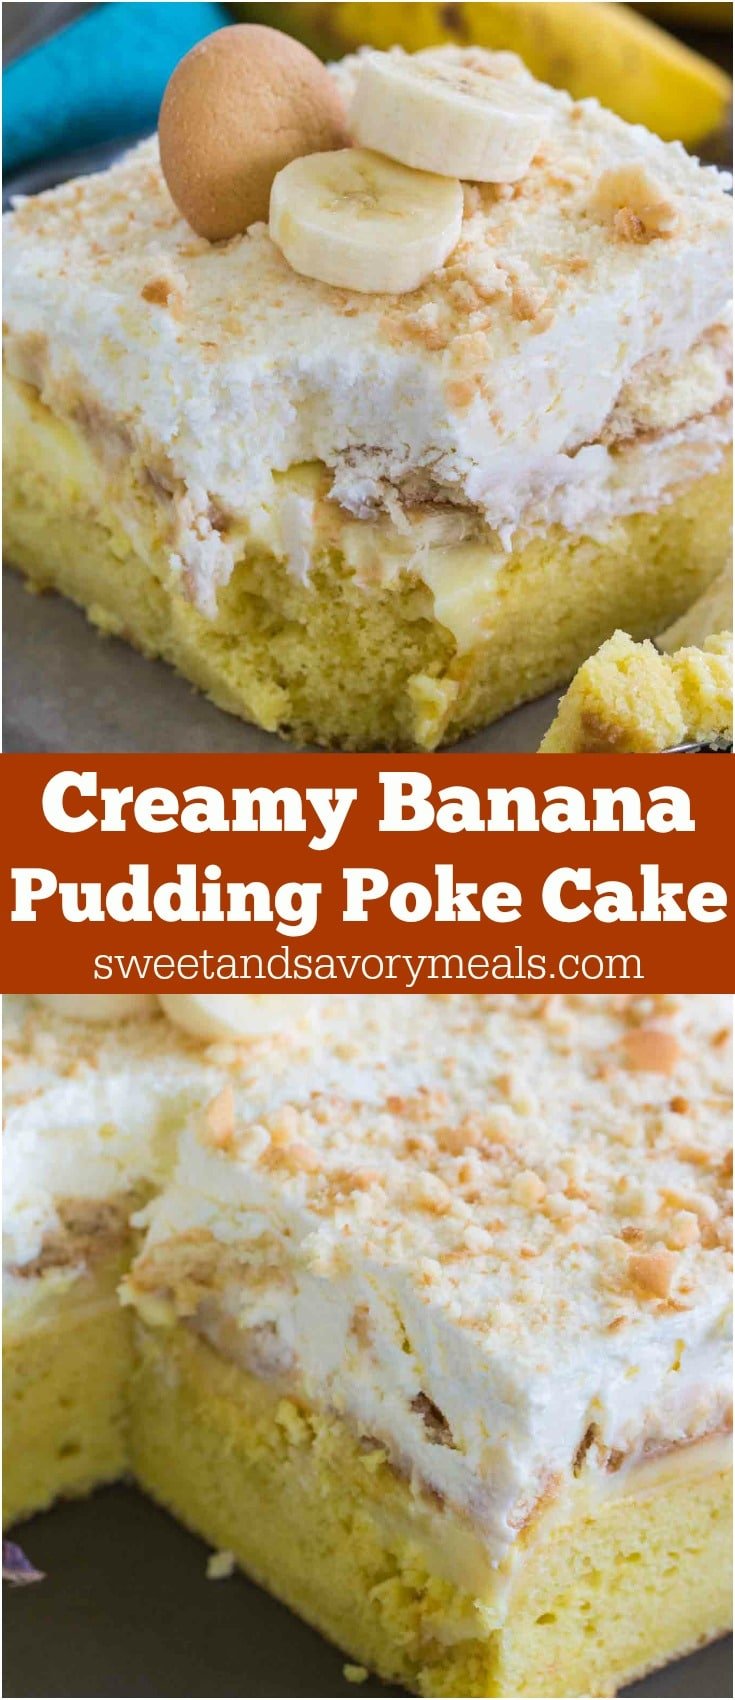 Banana Pudding Poke Cake is one of the easiest and most divine cakes you can make! Incredibly creamy and with lots of banana flavor!